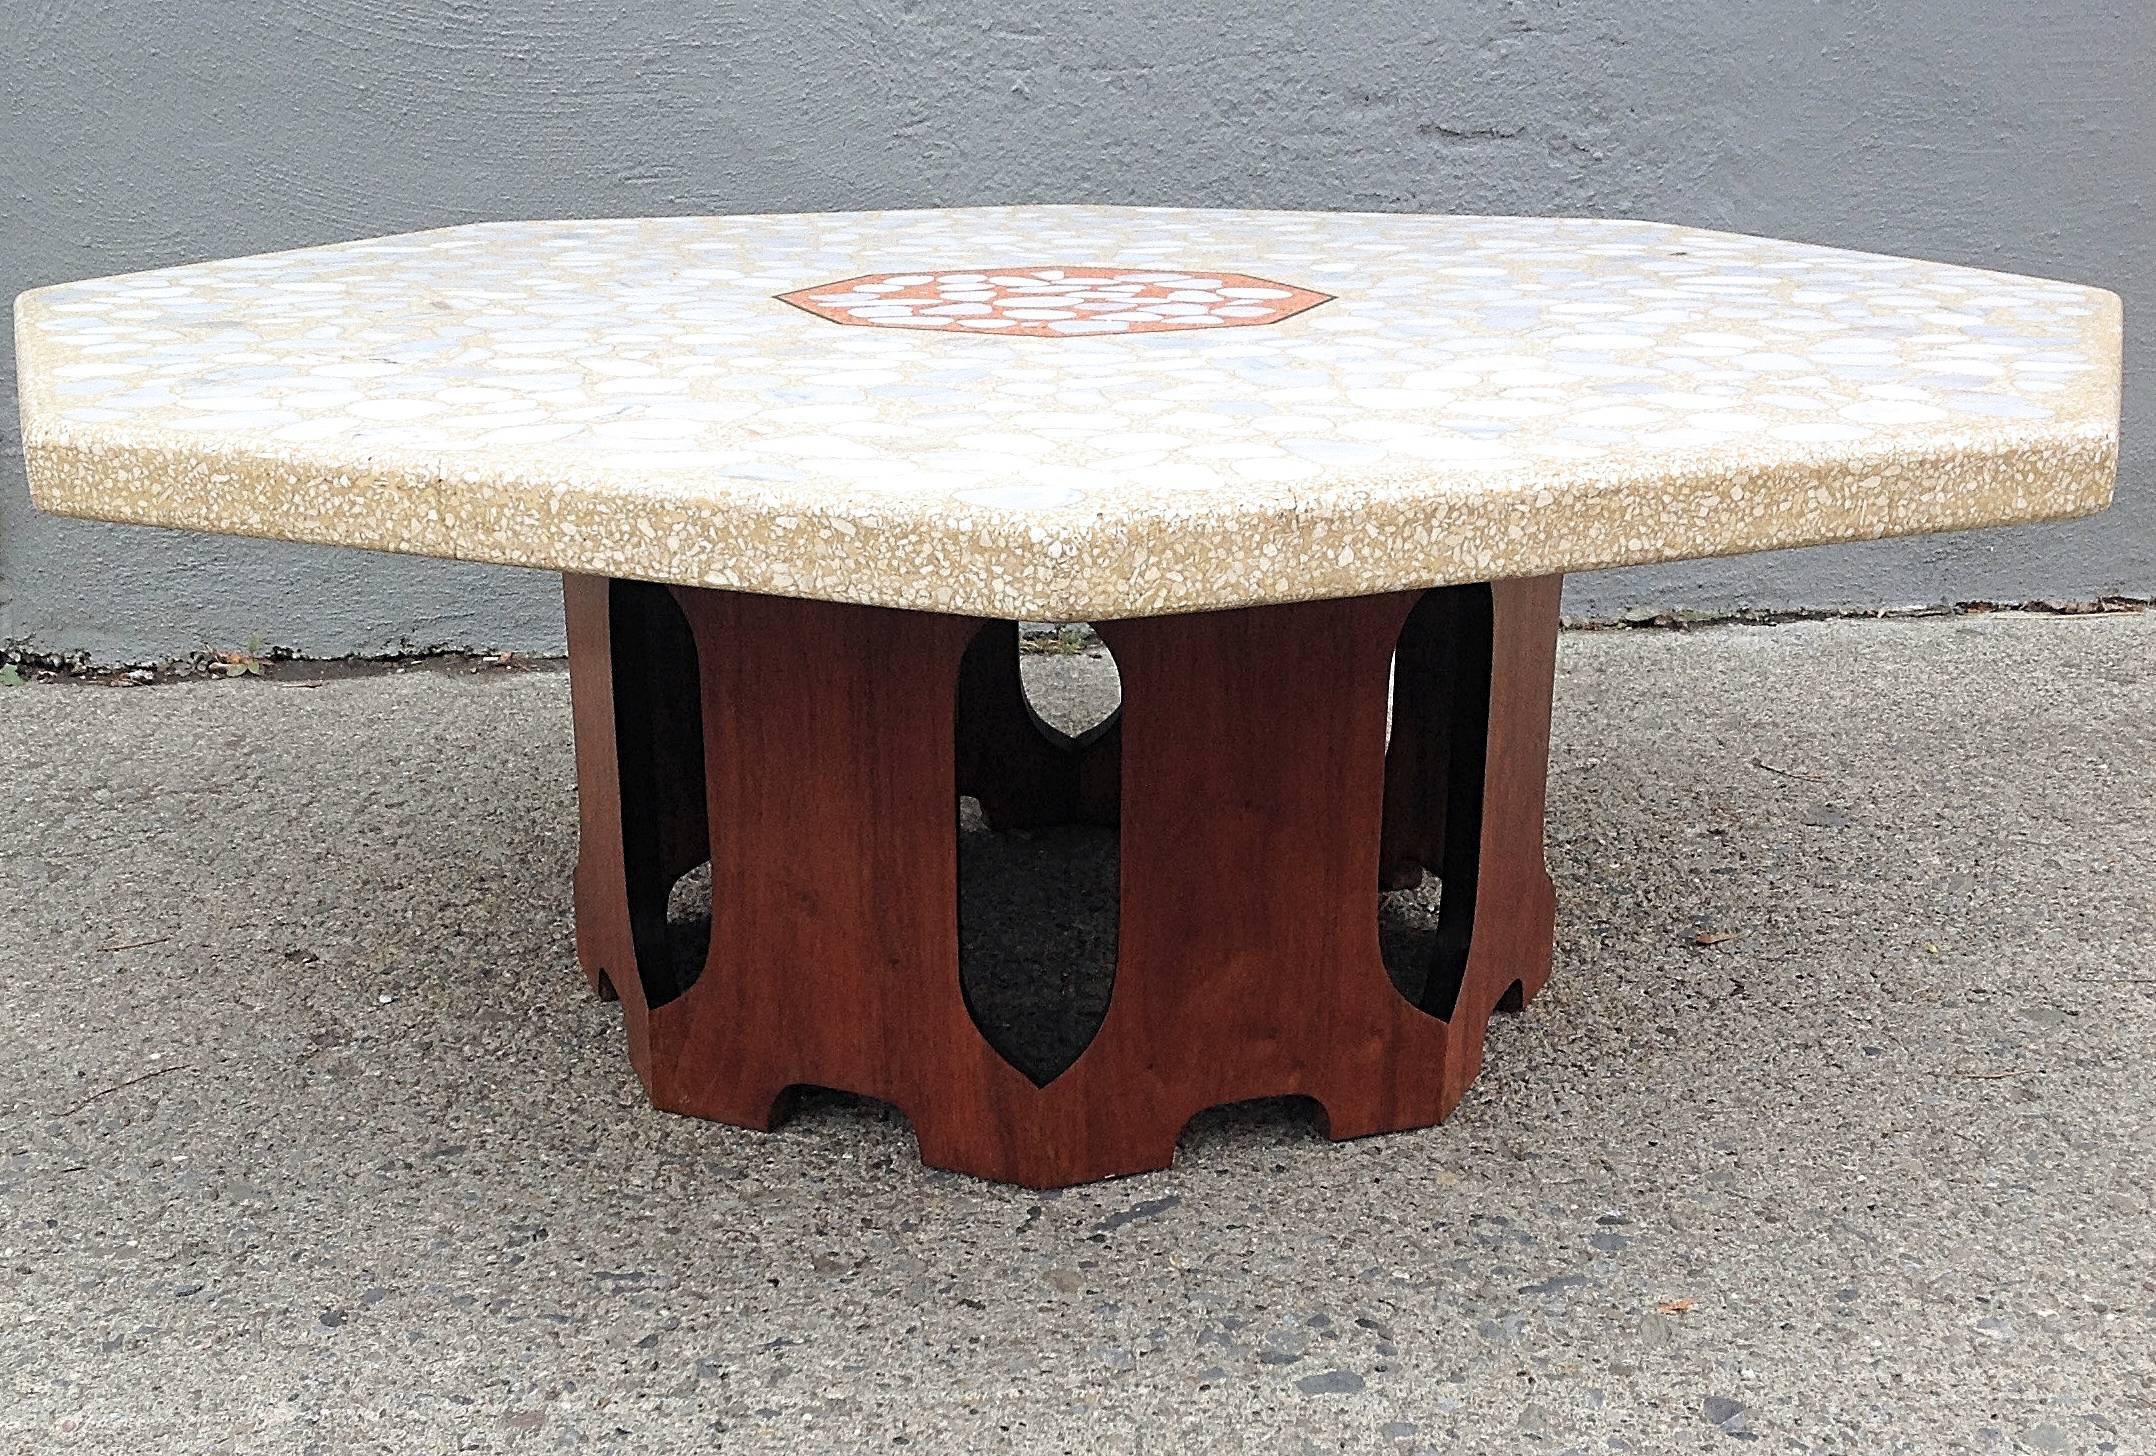 Large terrazzo octagonal low table by Harvey Probber.
Mixed aggregate, large stones small pebble. Contrasting orange center with brass detail. Walnut base with hex cutouts. Old repair veneer on base a shown.